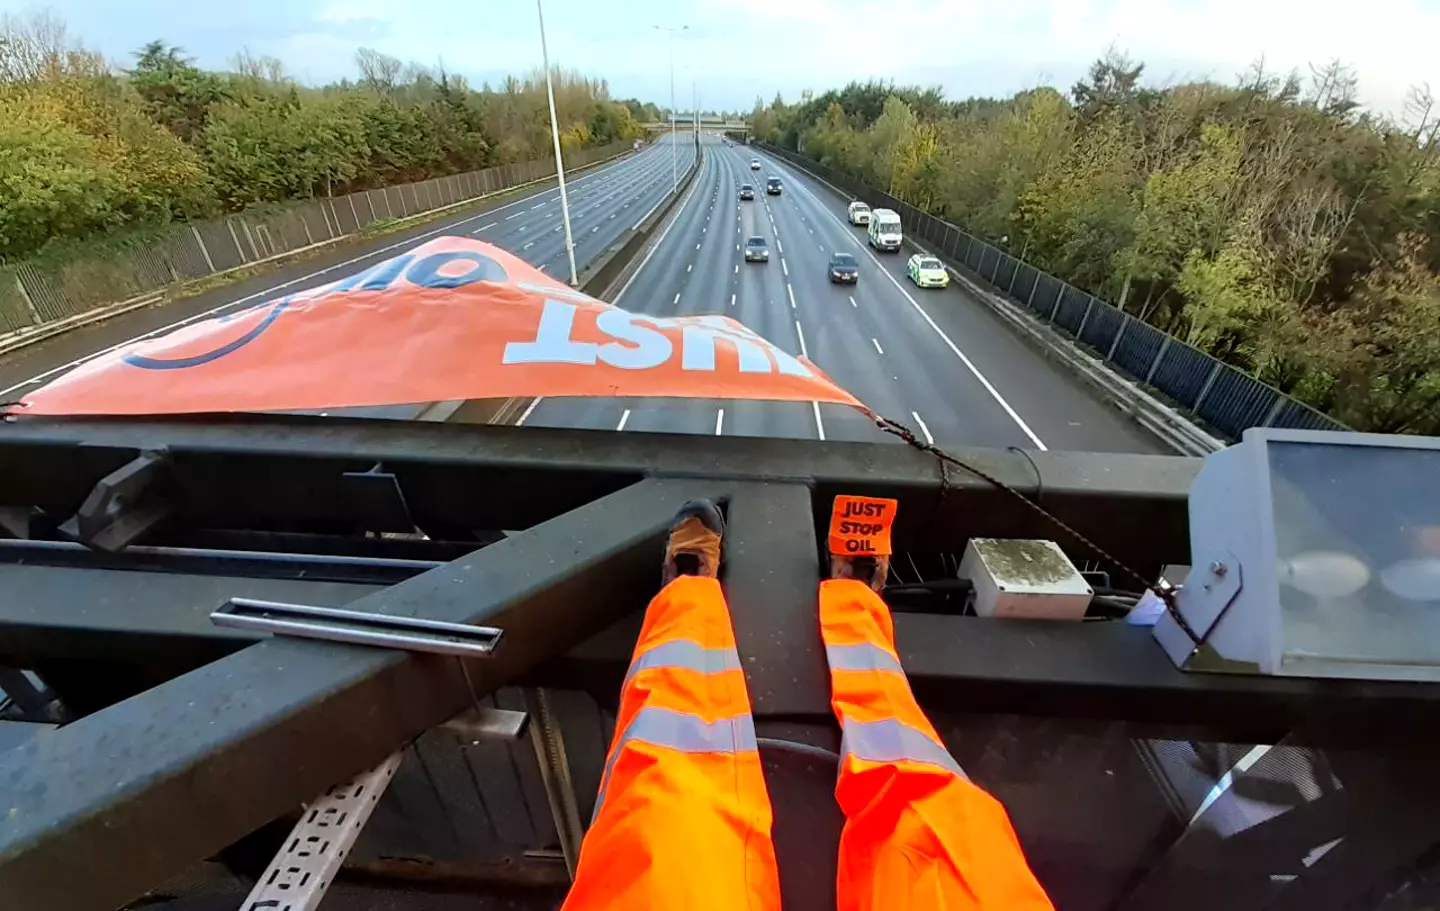 Alfred Beswick was arrested after climbing onto a gantry on the M25.